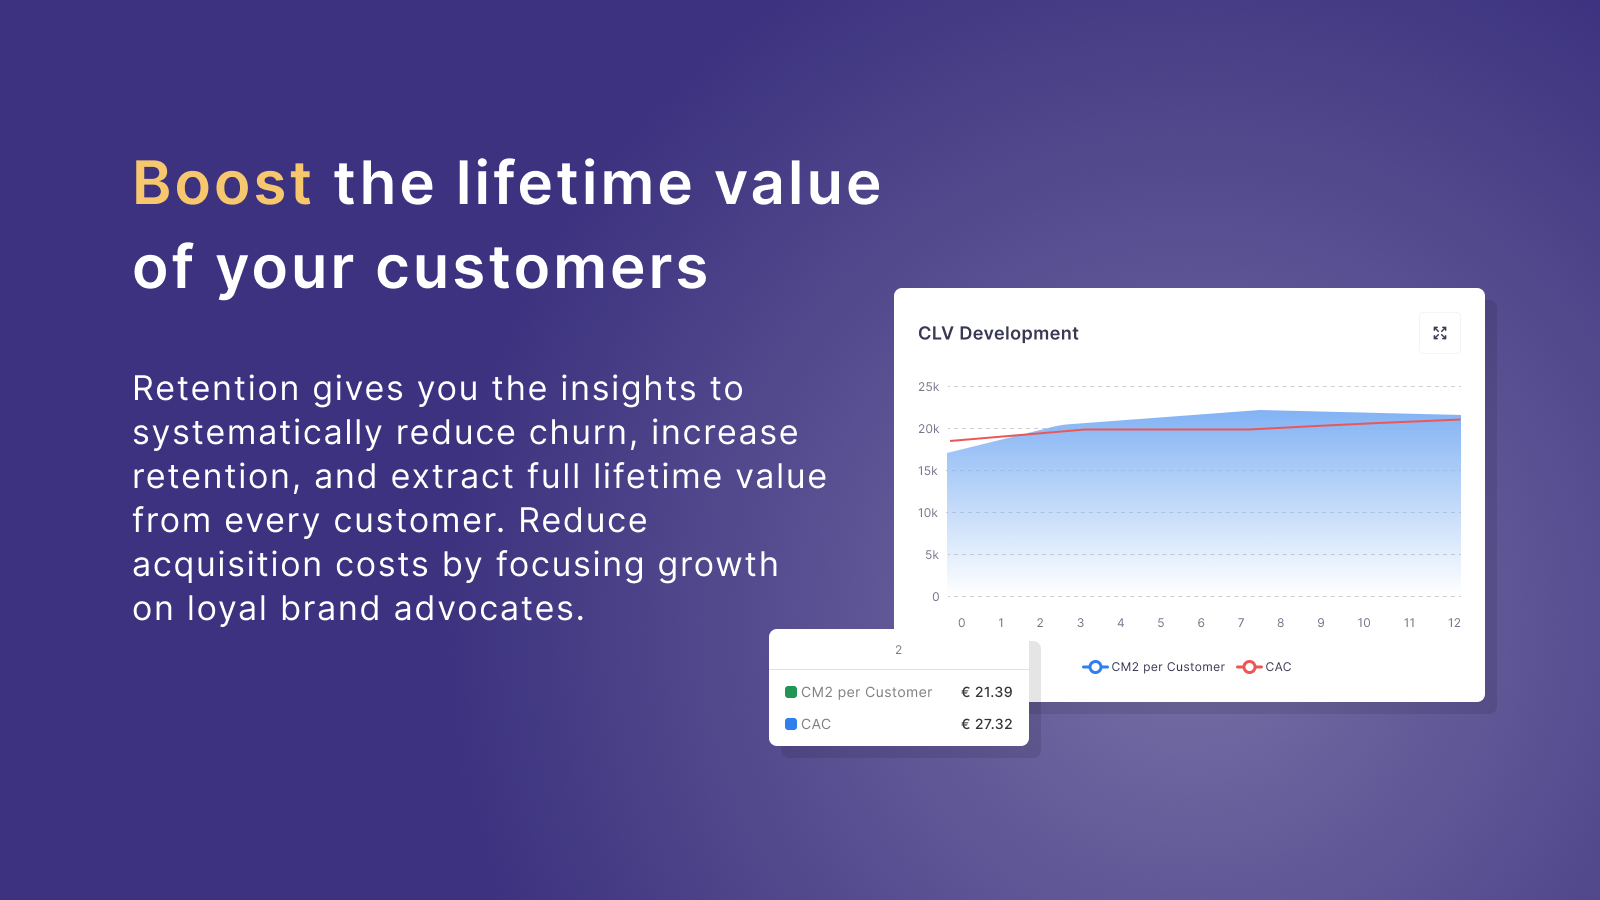 Klar - Boost the lifetime value of your customers